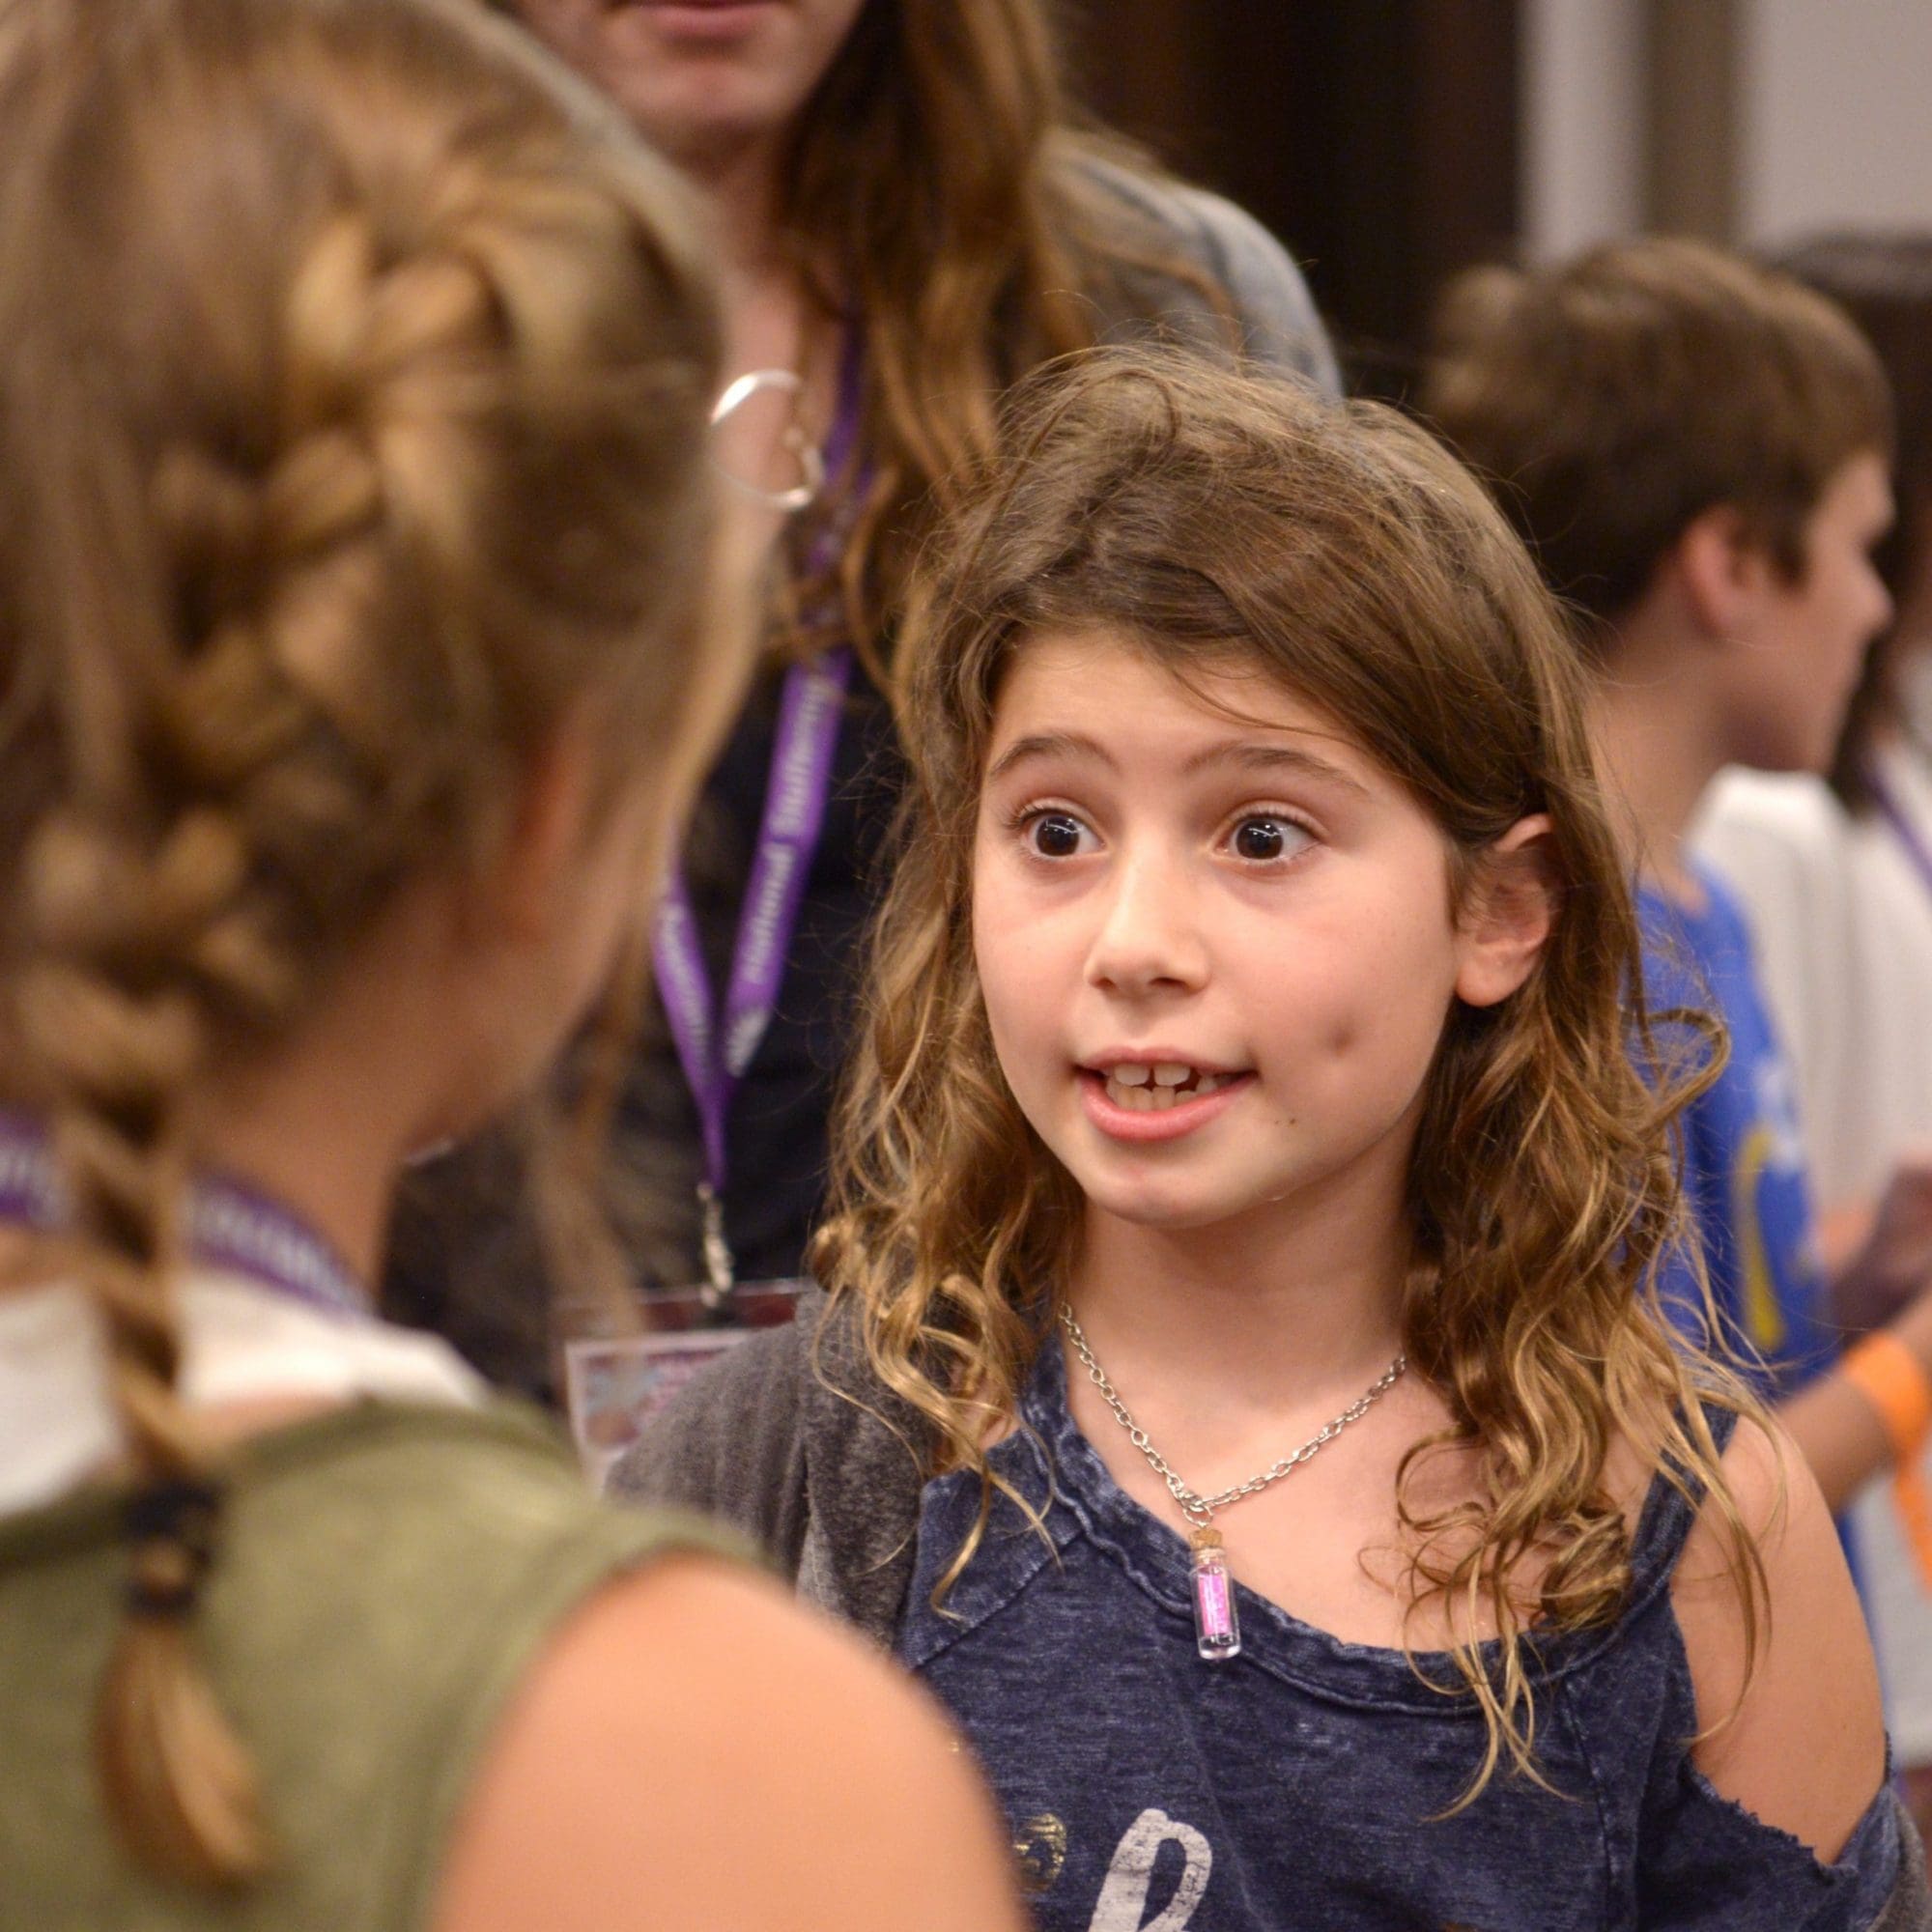 A young girl with curly brown hair and a blue shirt speaks animatedly to another child, whose back is to the camera. They appear to be engaged in a lively conversation in a crowded room, promoting